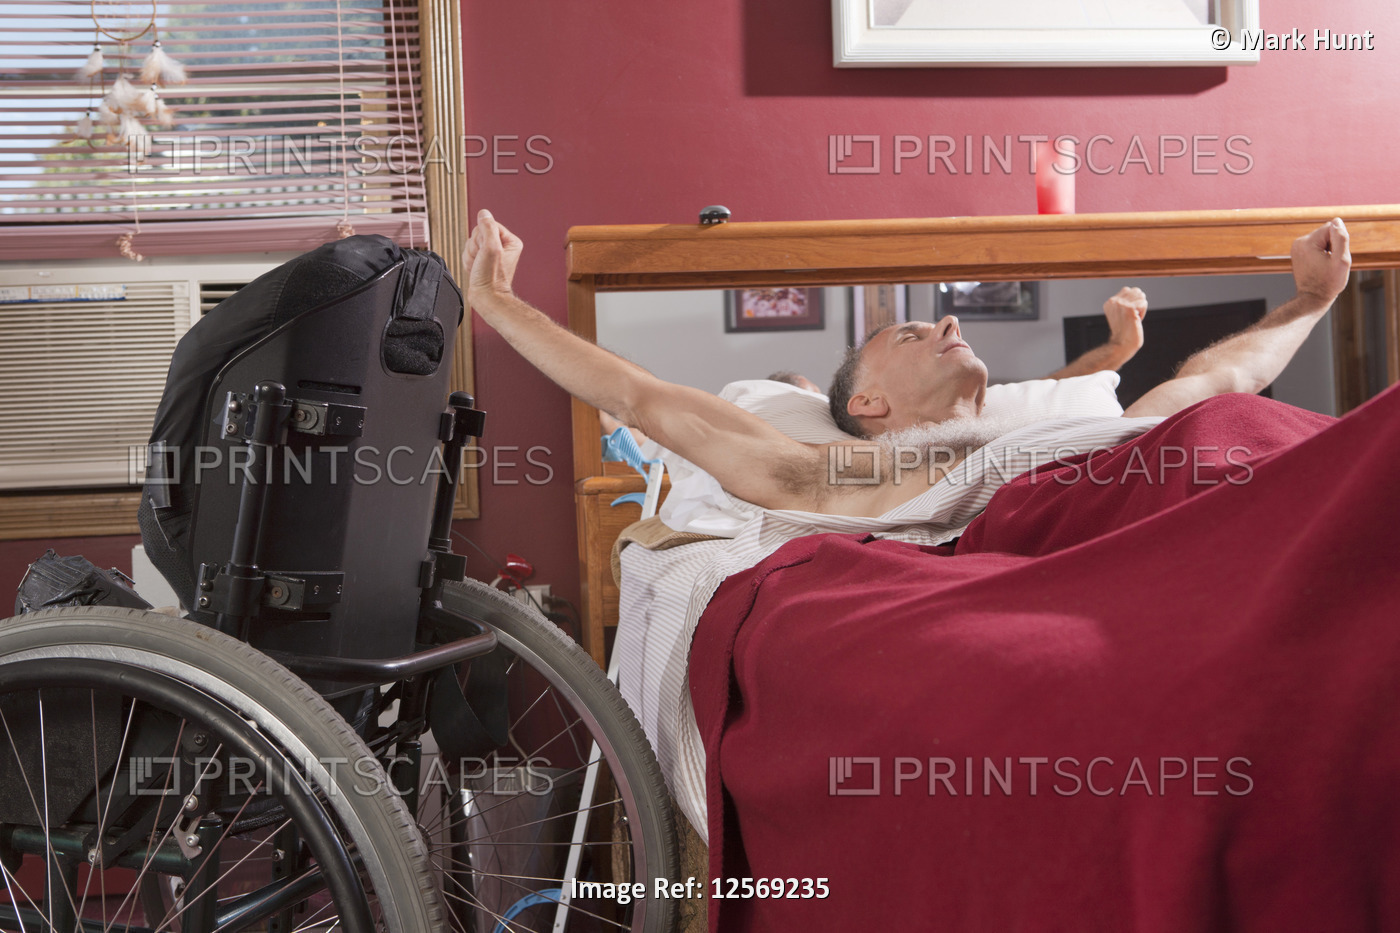 Man with spinal cord injury stretching on the bed